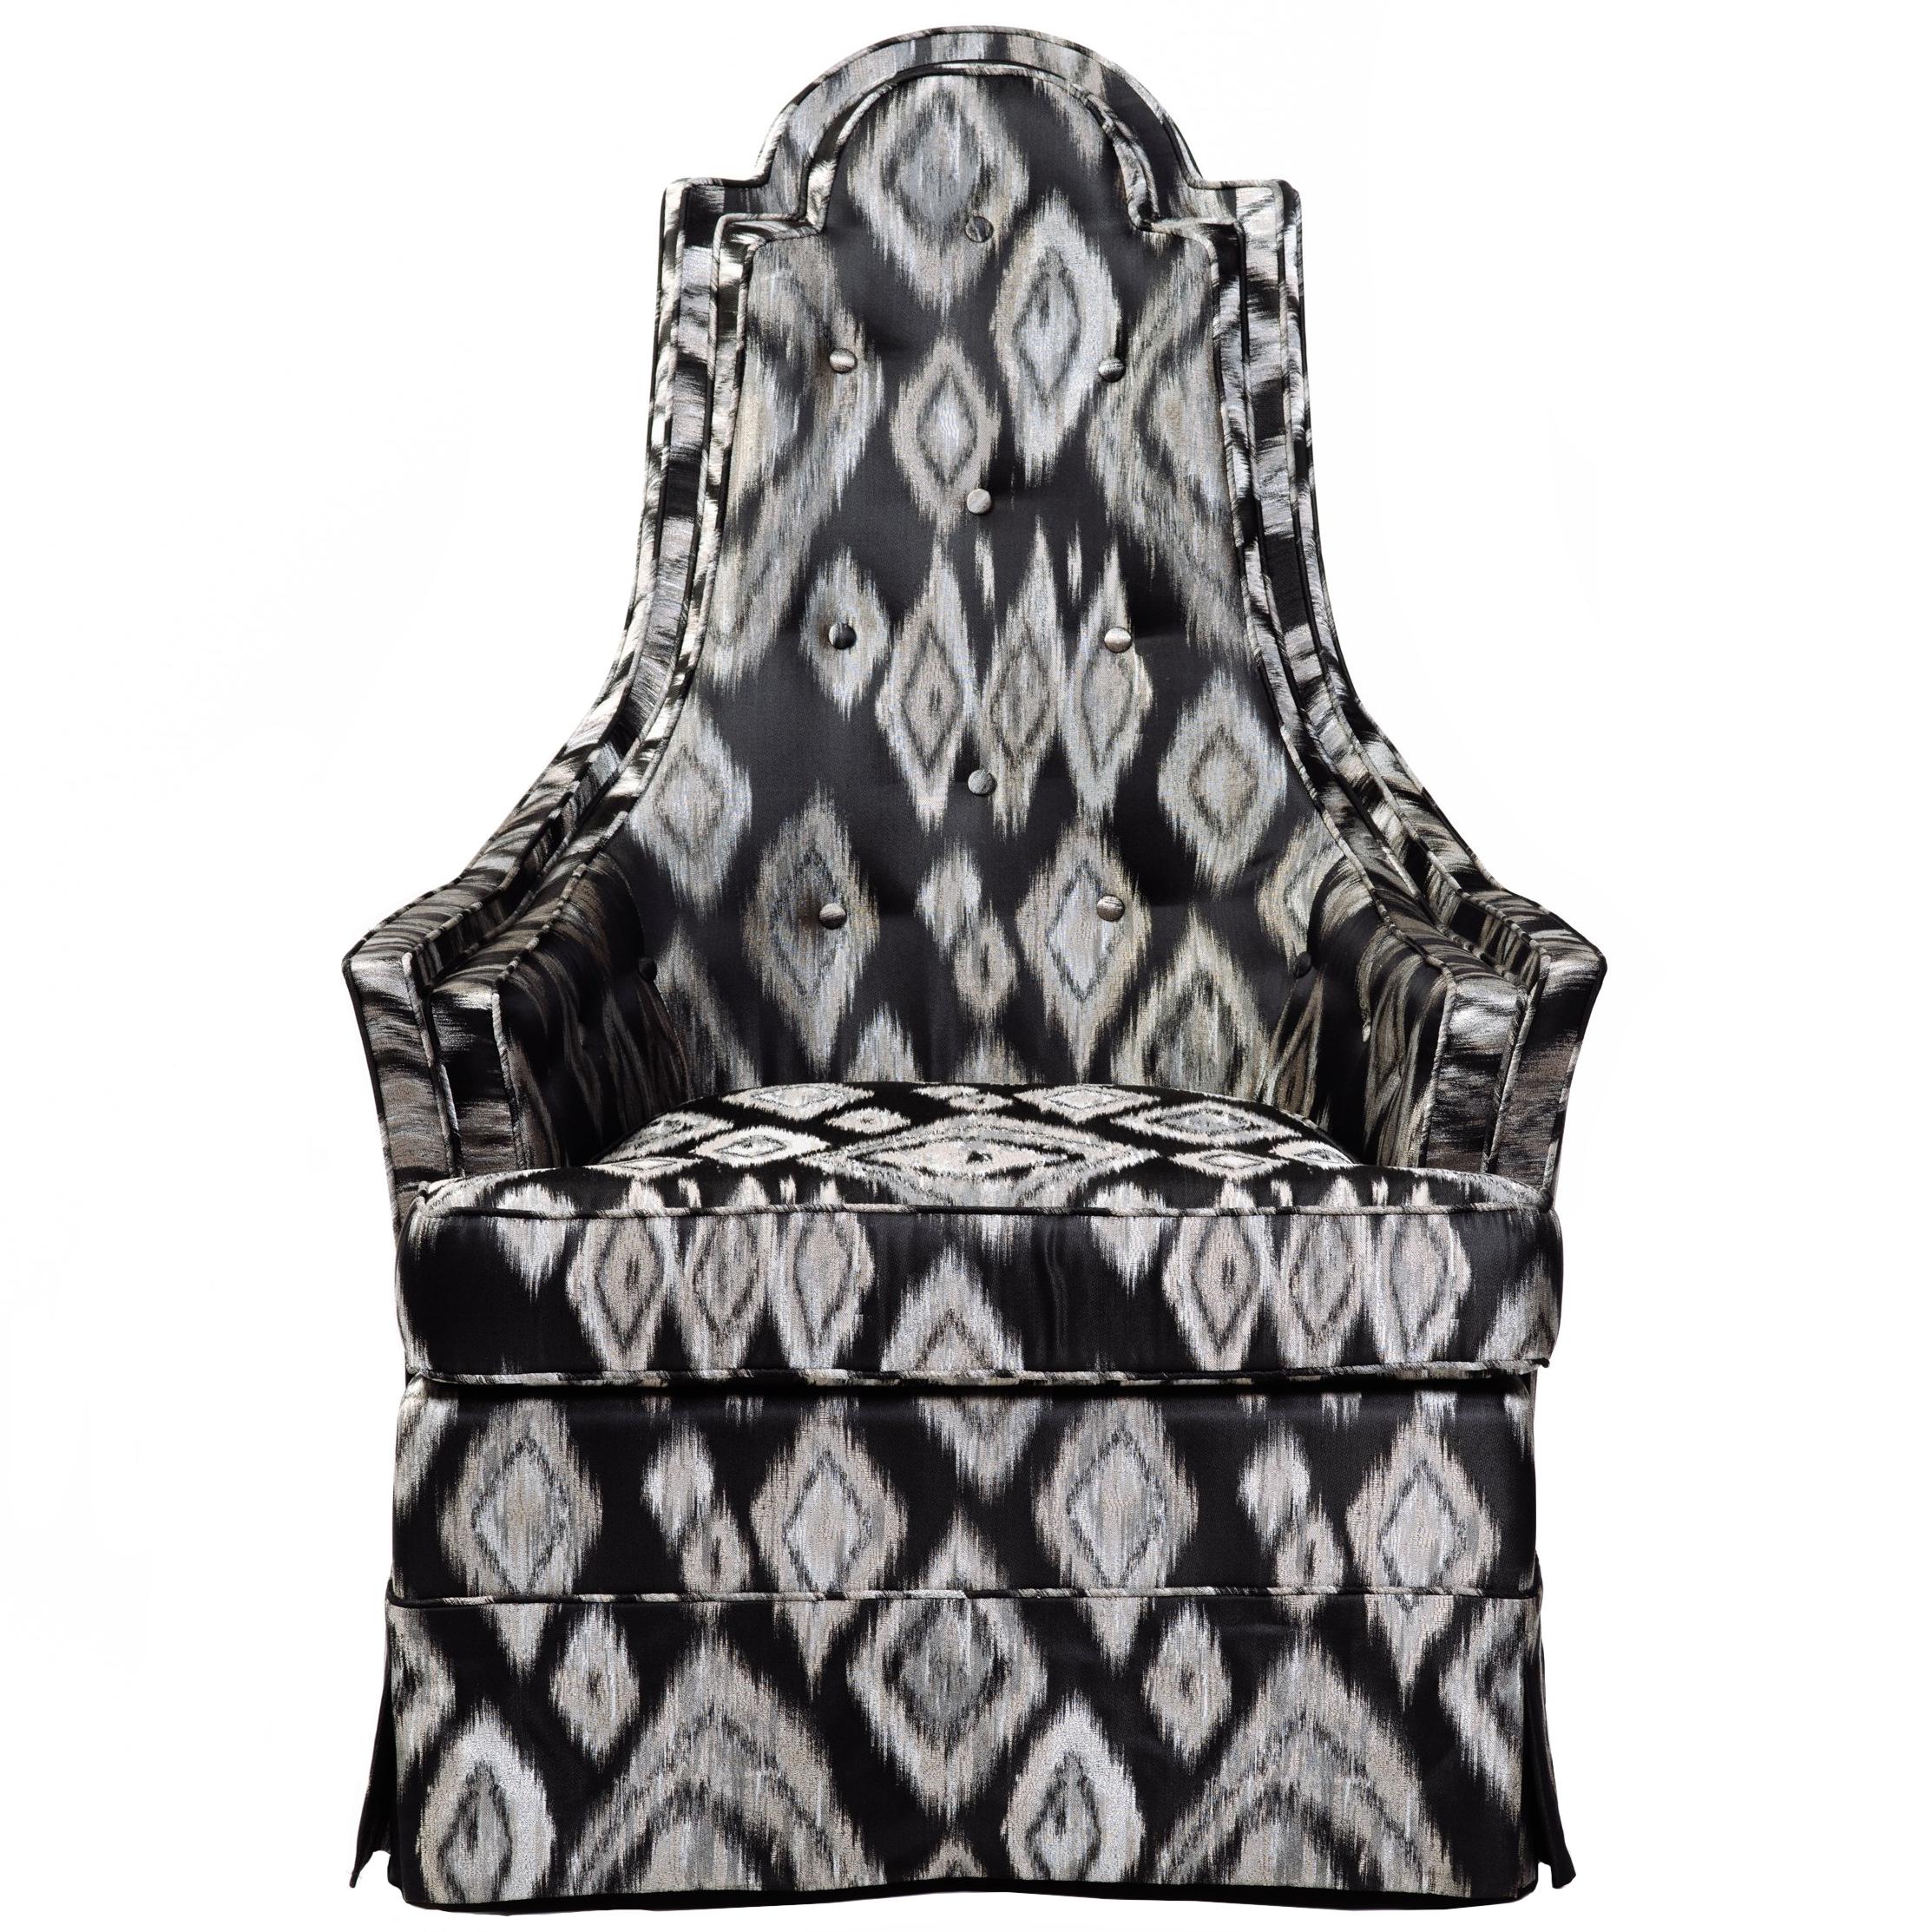 Graphic Ikat Silk Hollywood Regency Lounge Chair